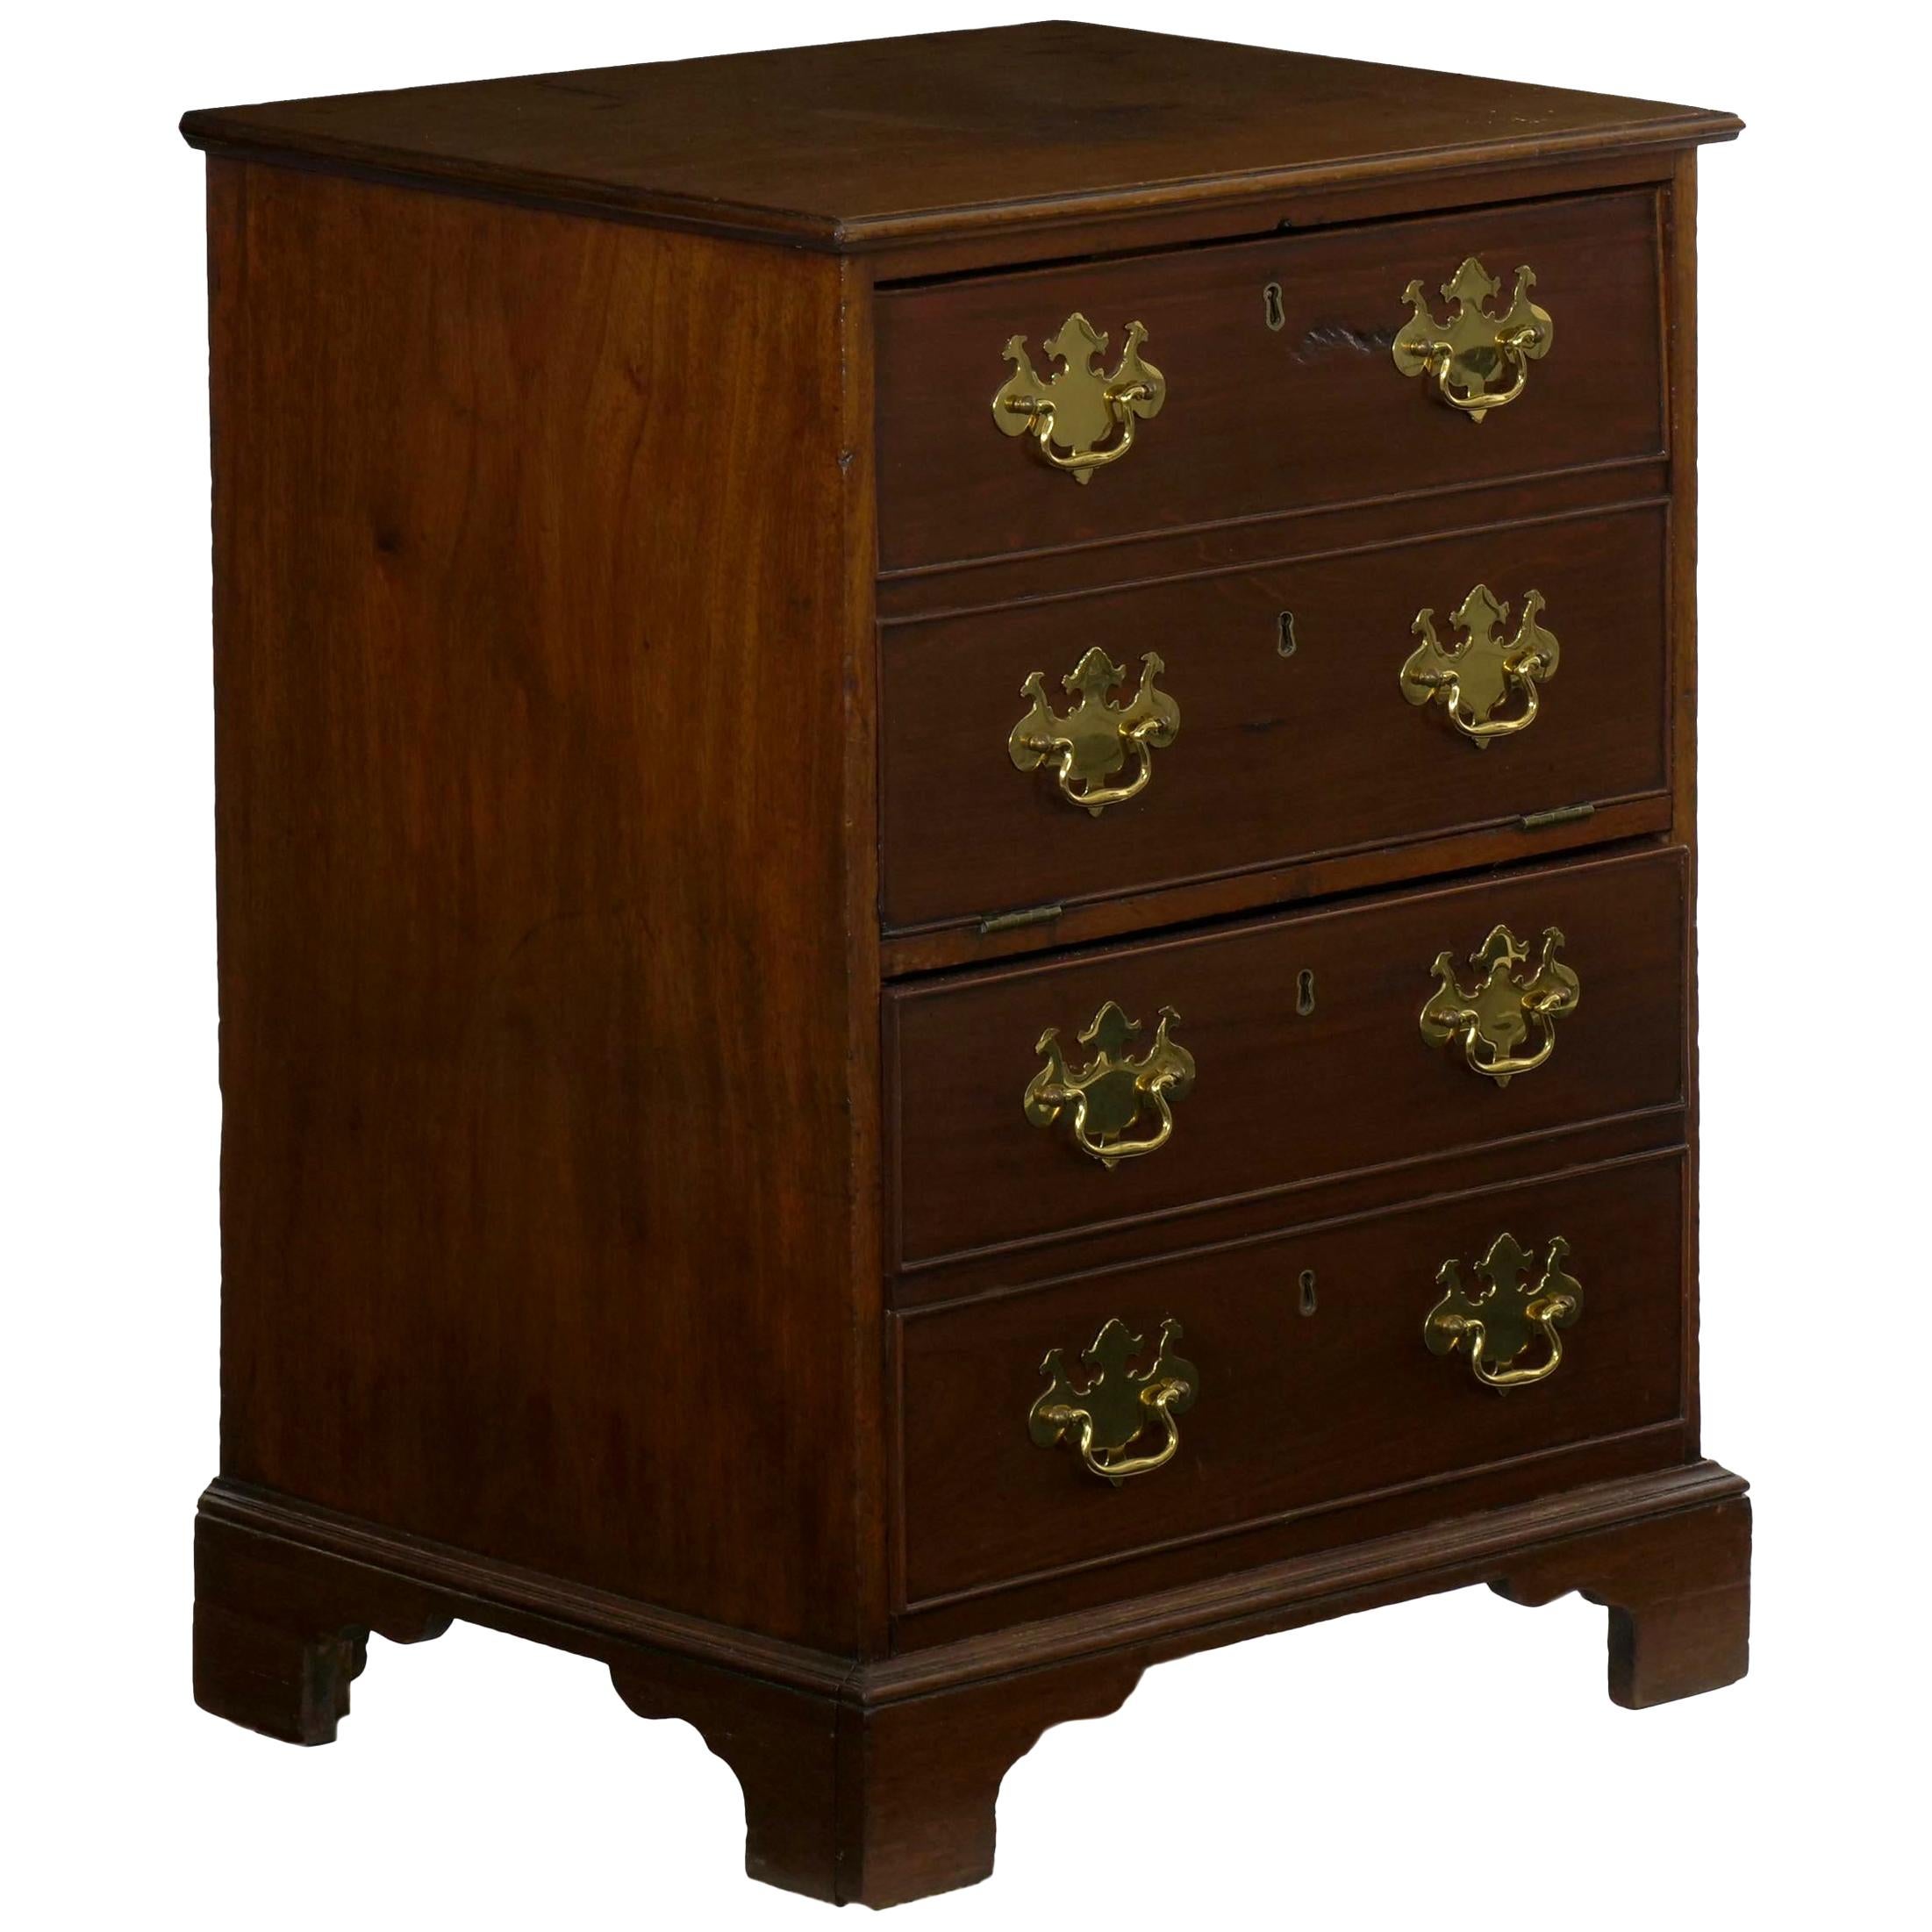 19th Century English Mahogany Antique Bedside Nightstand Table / Office Cabinet